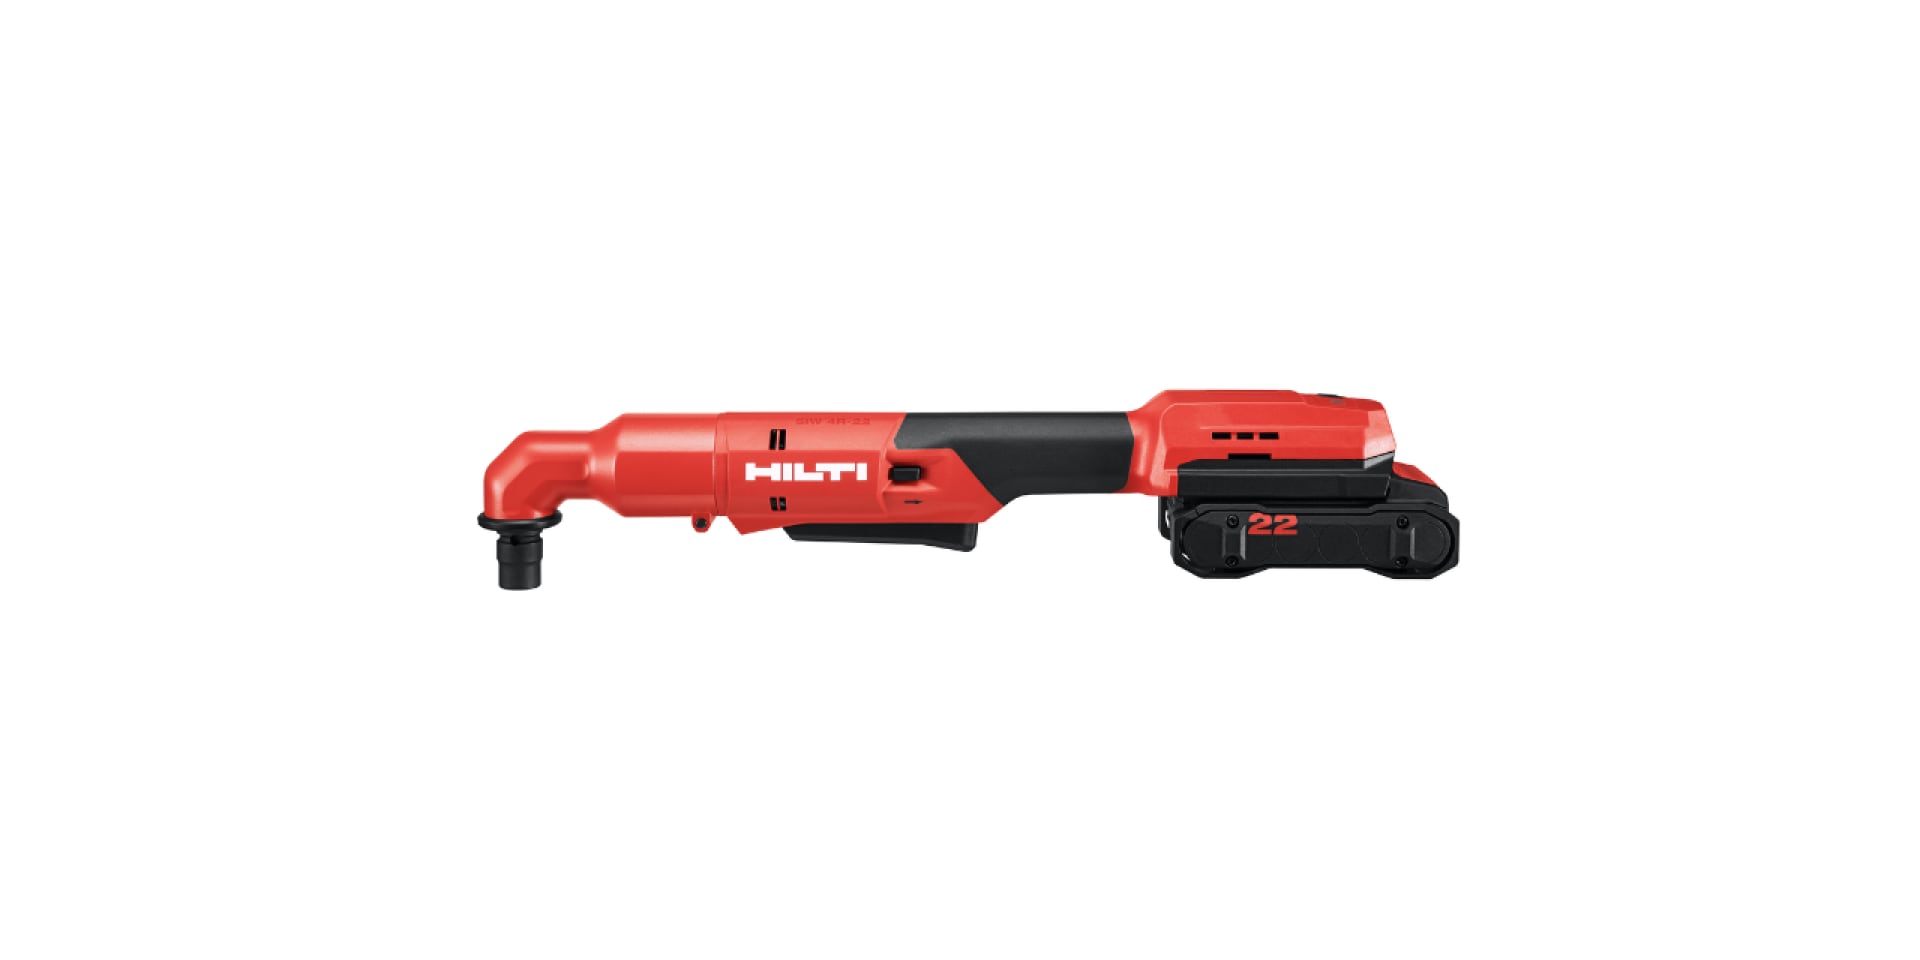 SIW 4R-22 RIGHT-ANGLE IMPACT WRENCH